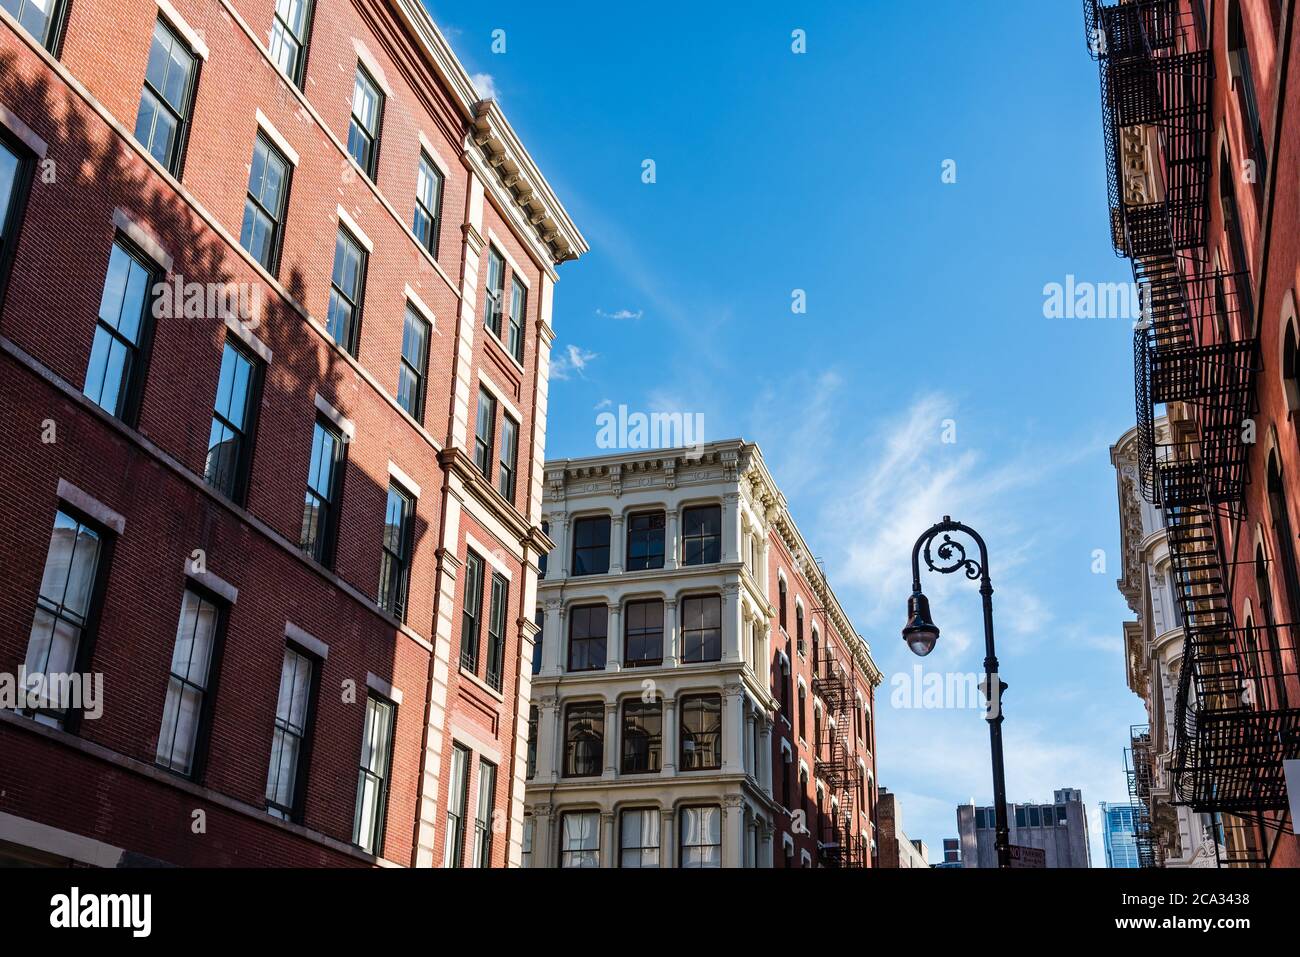 Typical buildings in Soho Cast Iron historic District in New York City. Greene Street. Stock Photo